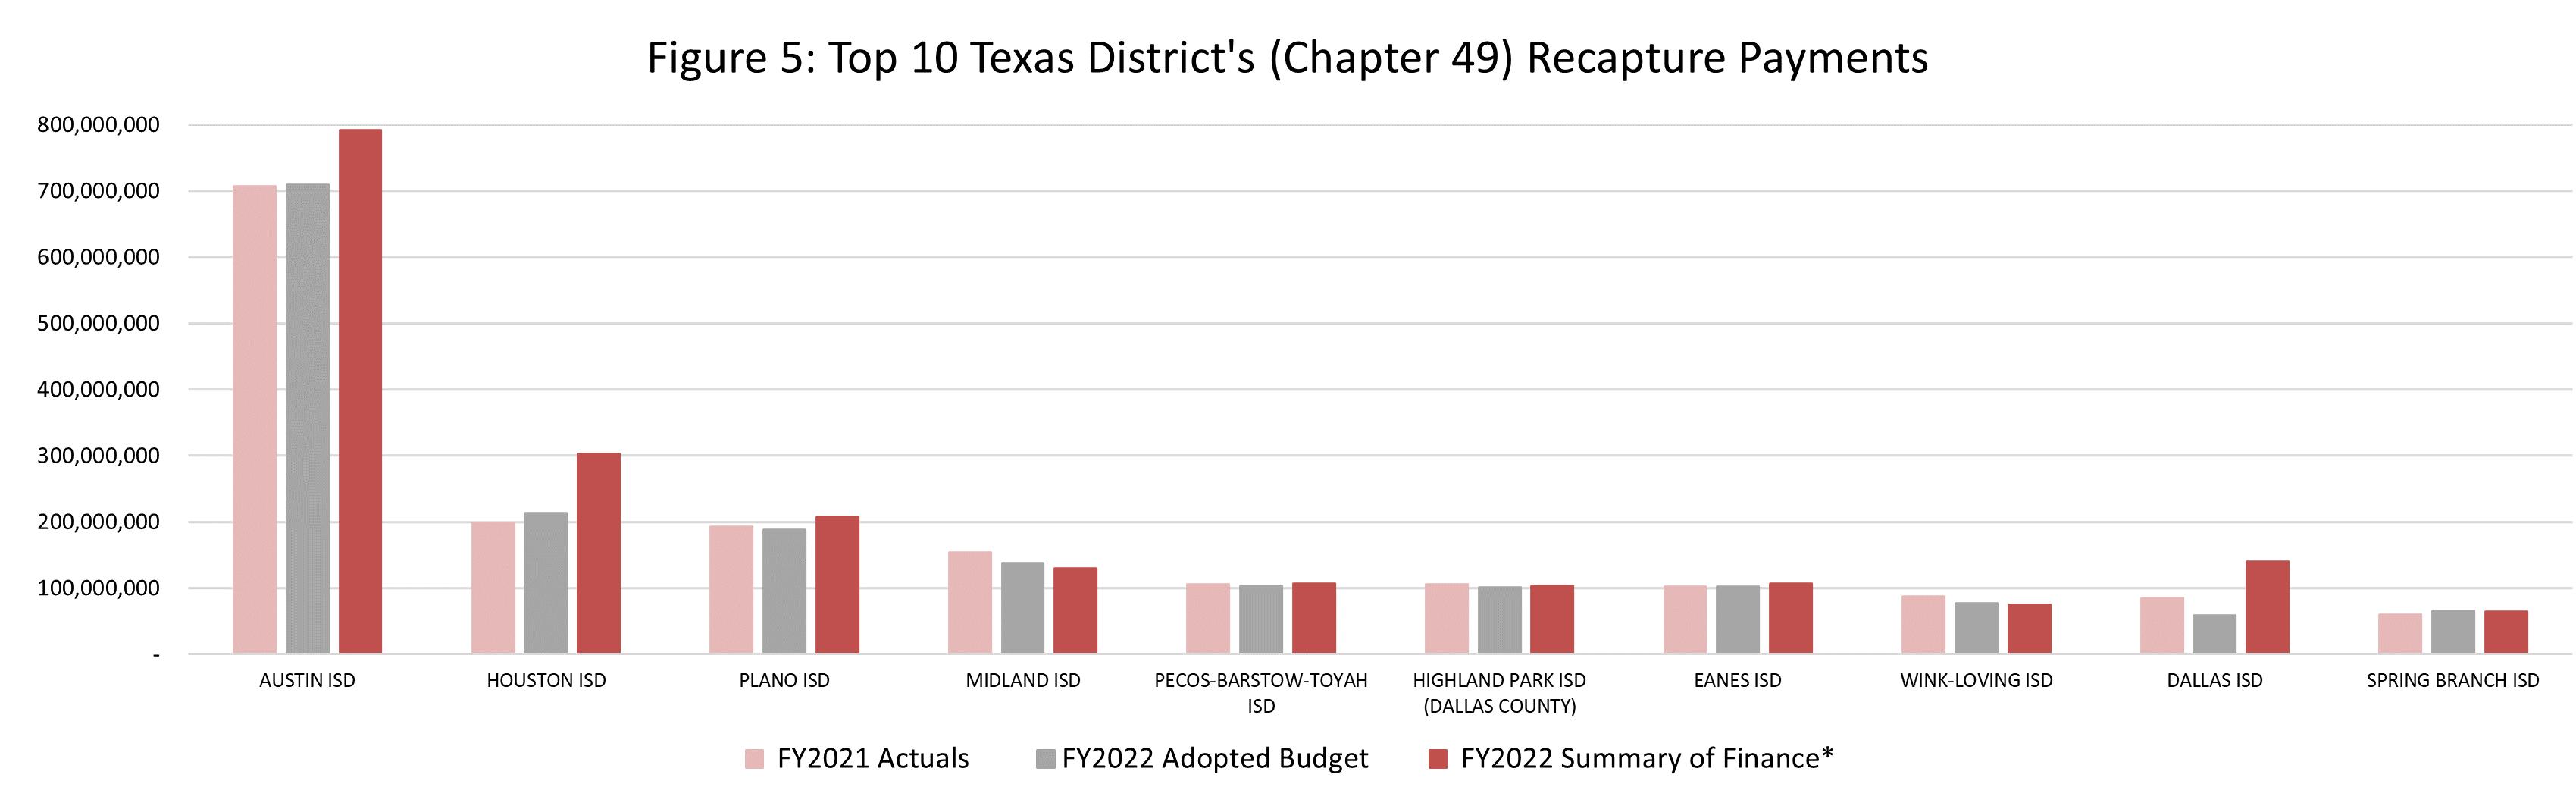 Top 10 Texas Districts (Chapter 49) Recapture Payments